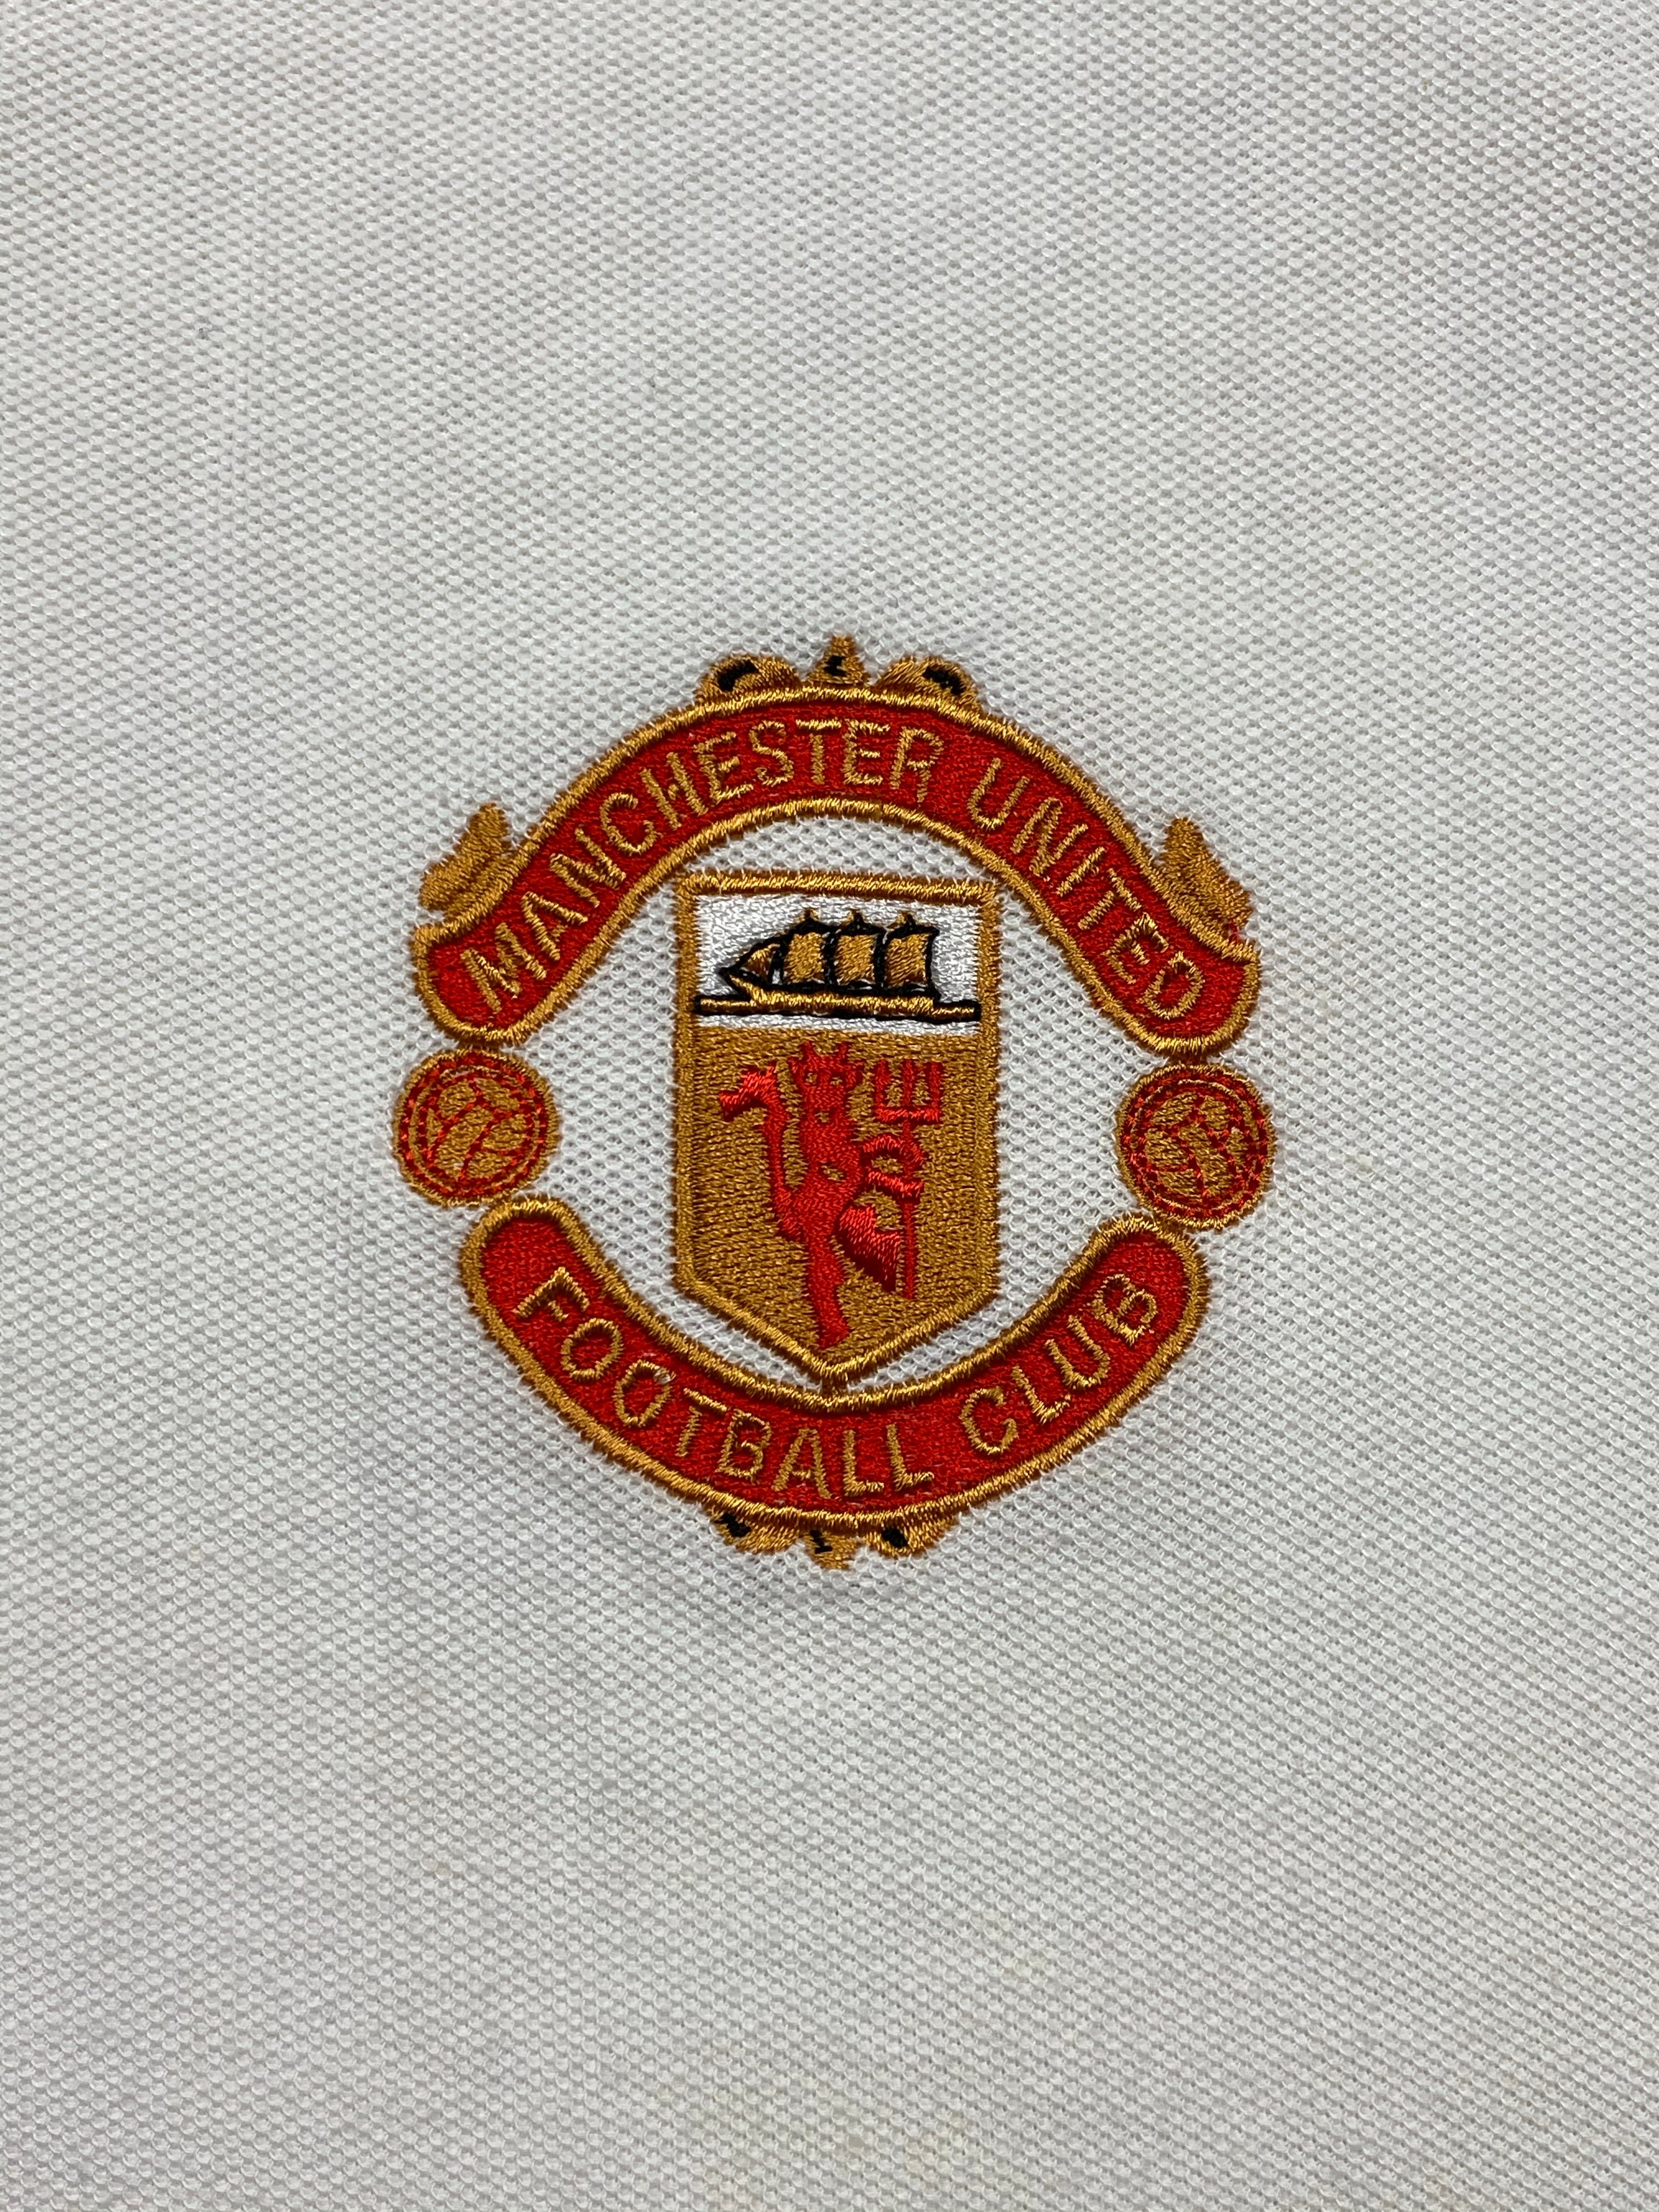 Polo Manchester United 1998/99 (XL) 9/10